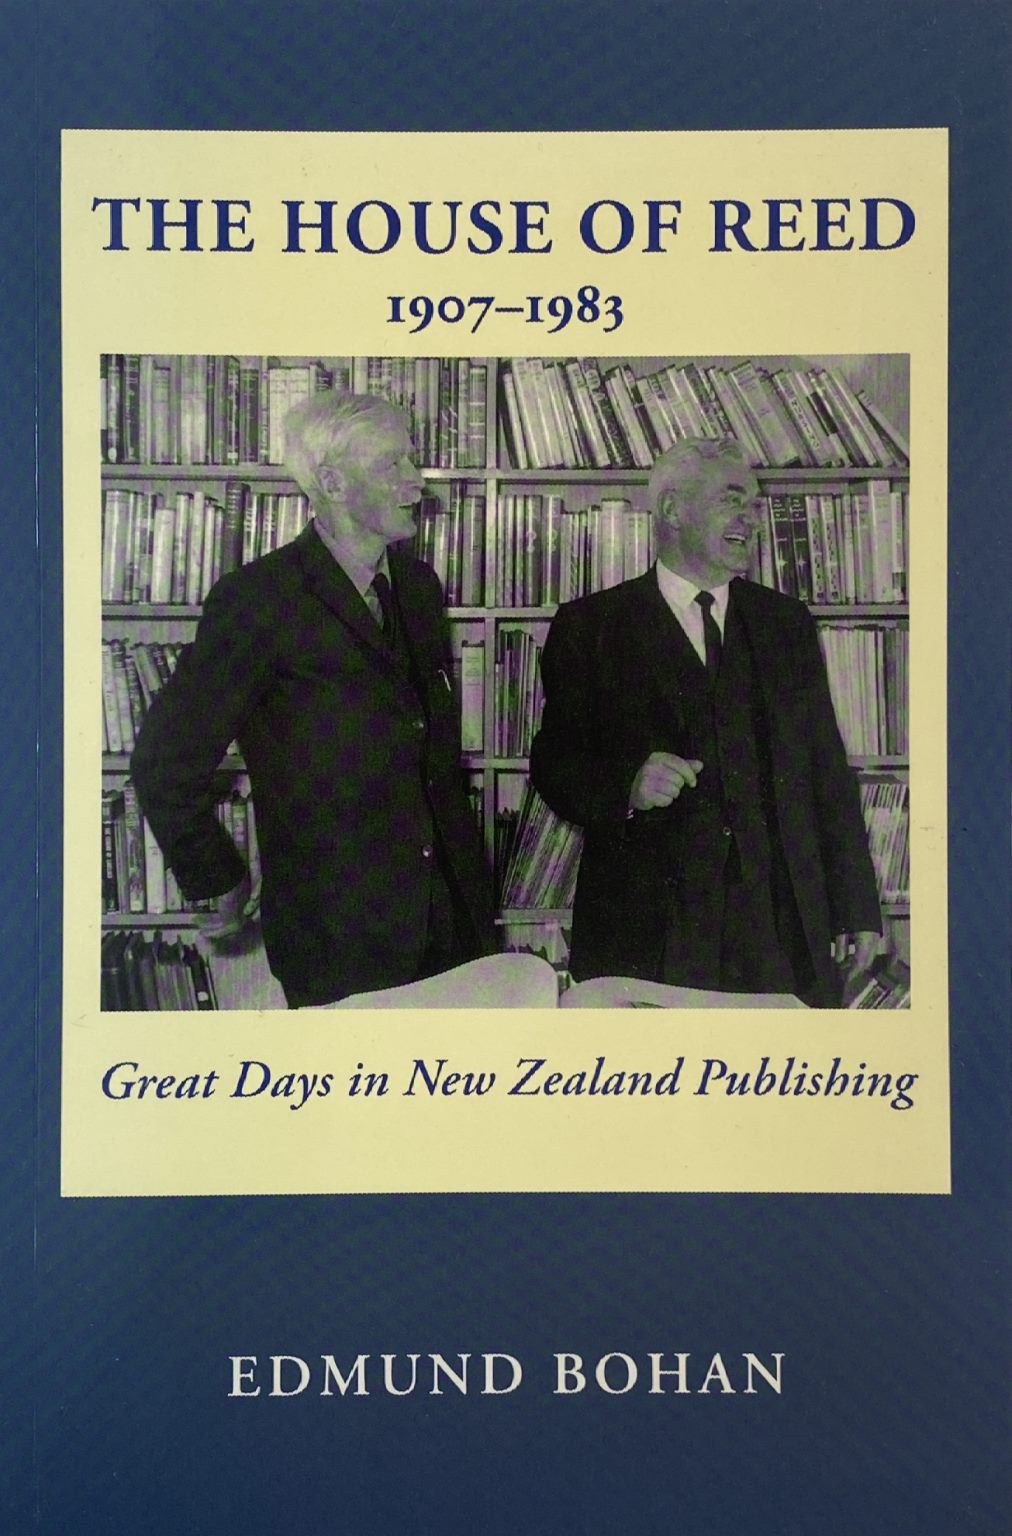 THE HOUSE OF REED 1907-1983 Great Days in New Zealand Publishing